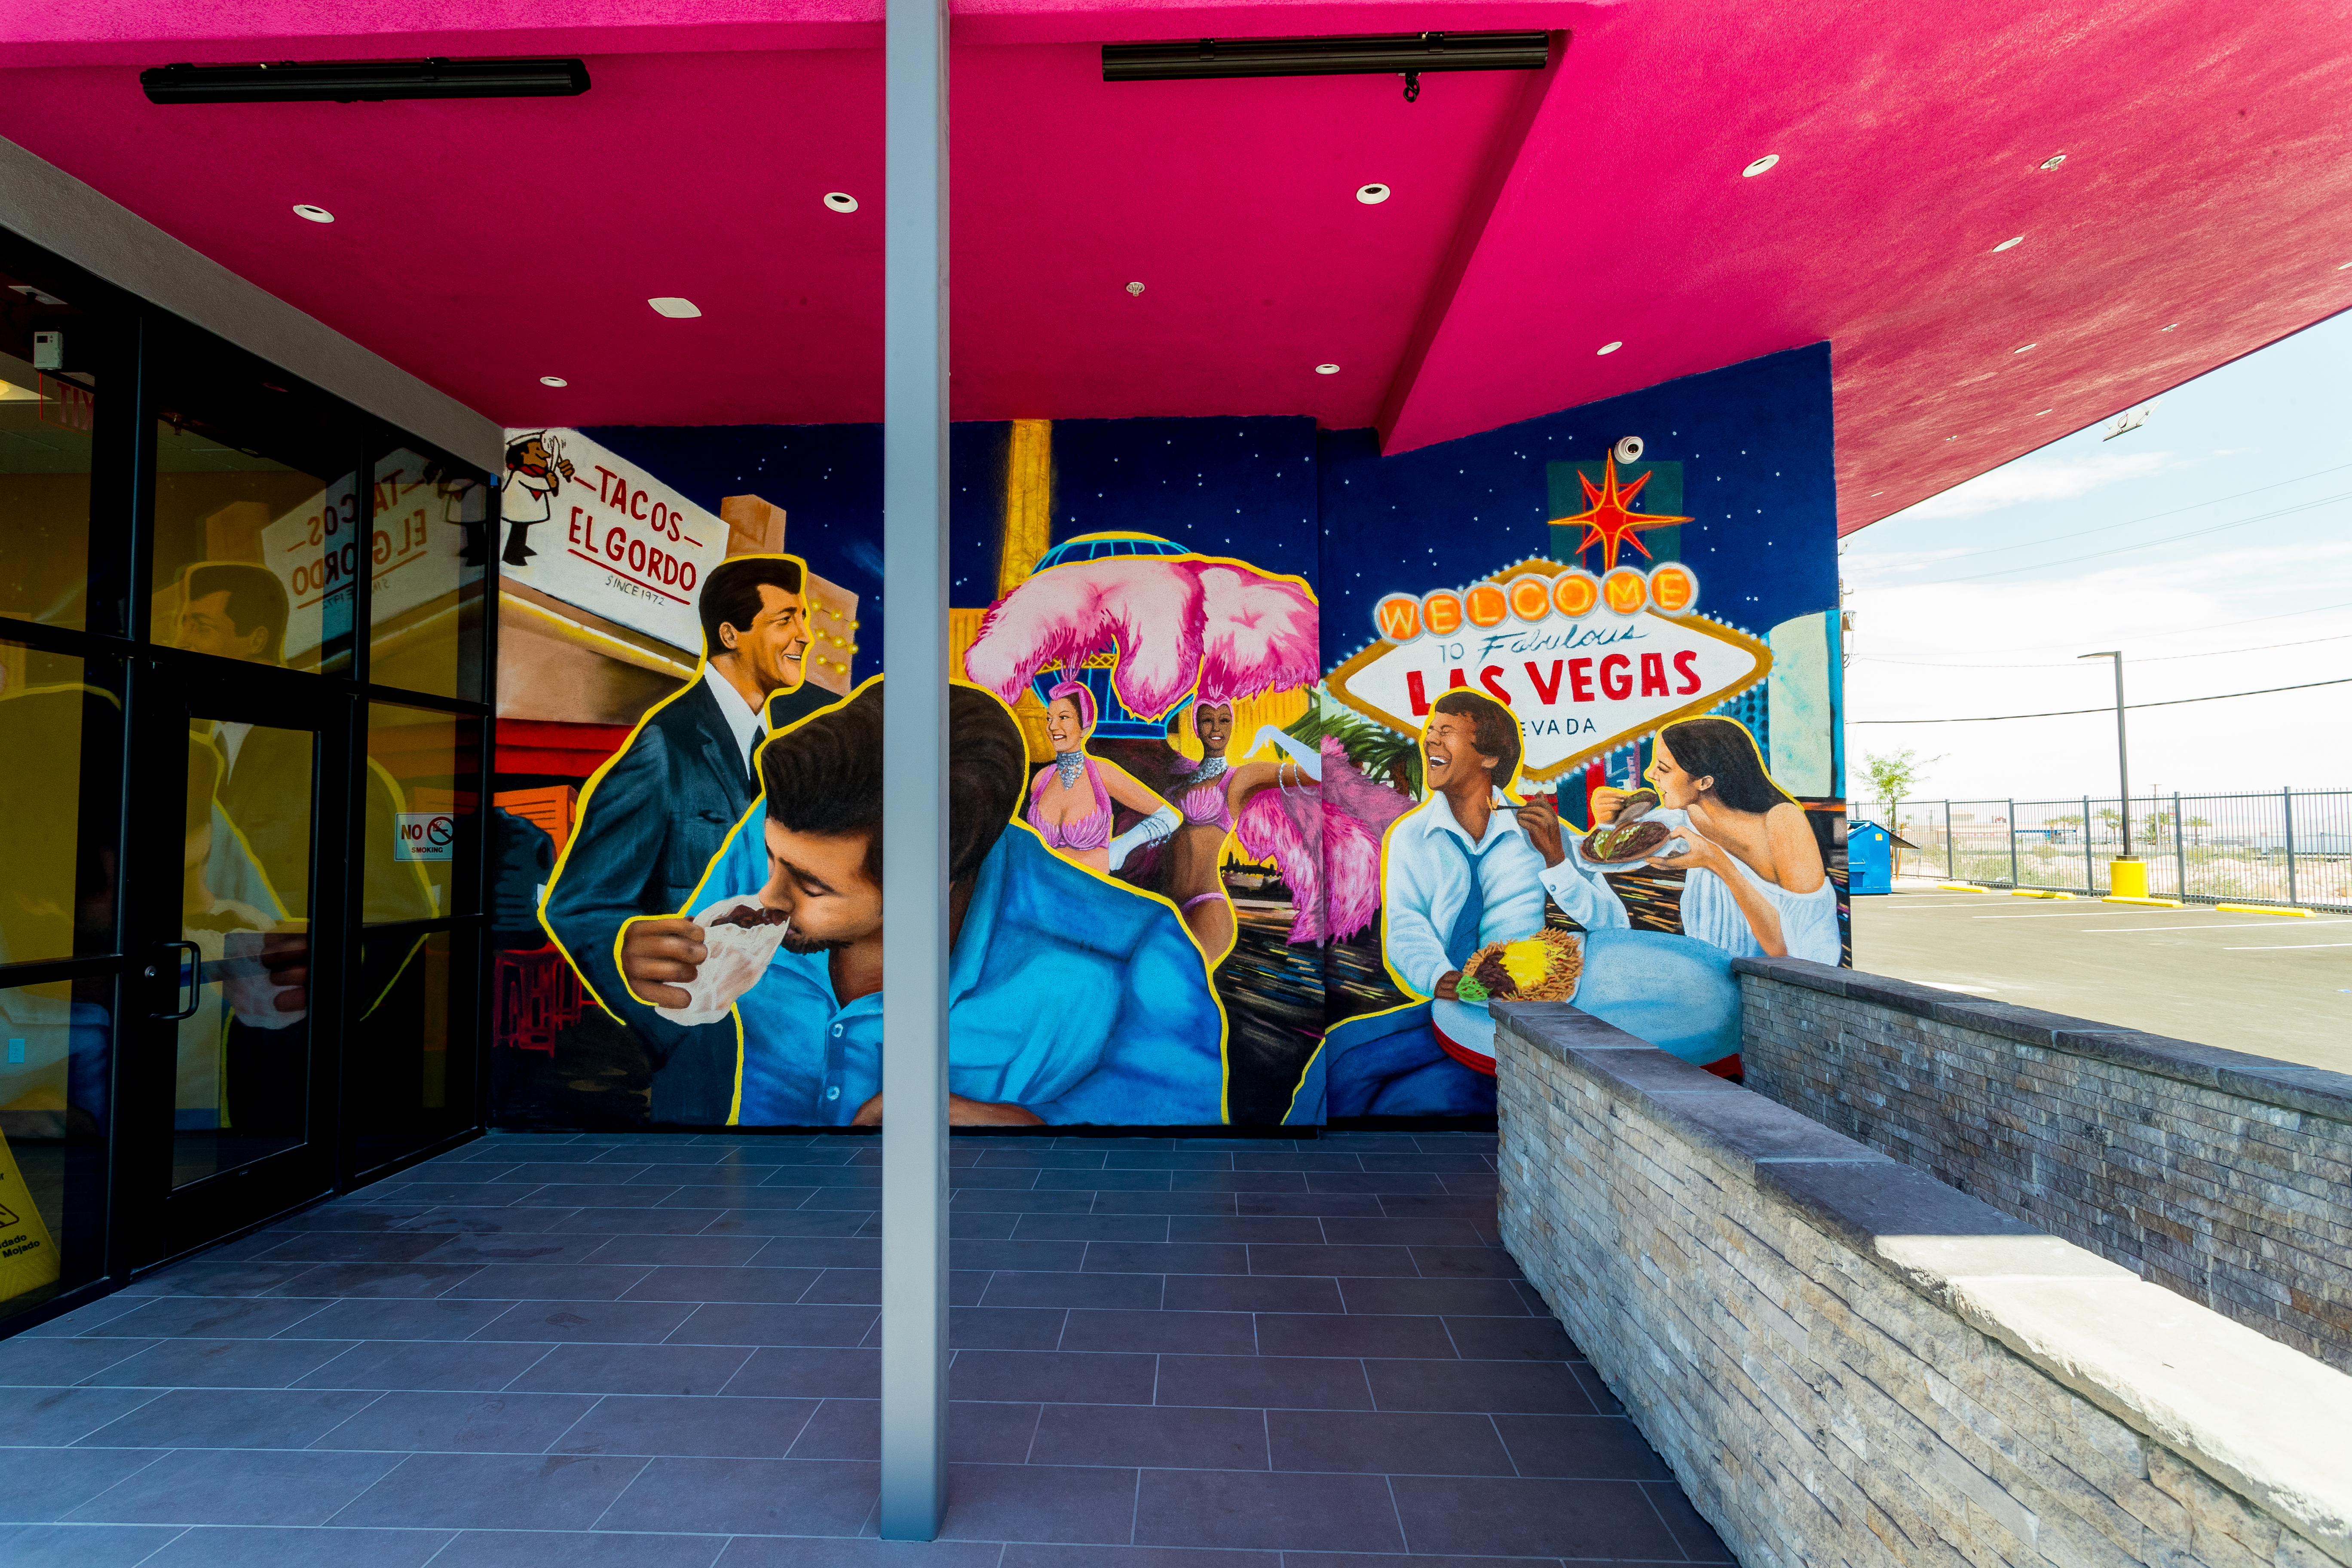 A mural depicting people eating tacos in front of the “Welcome to Fabulous Las Vegas” sign